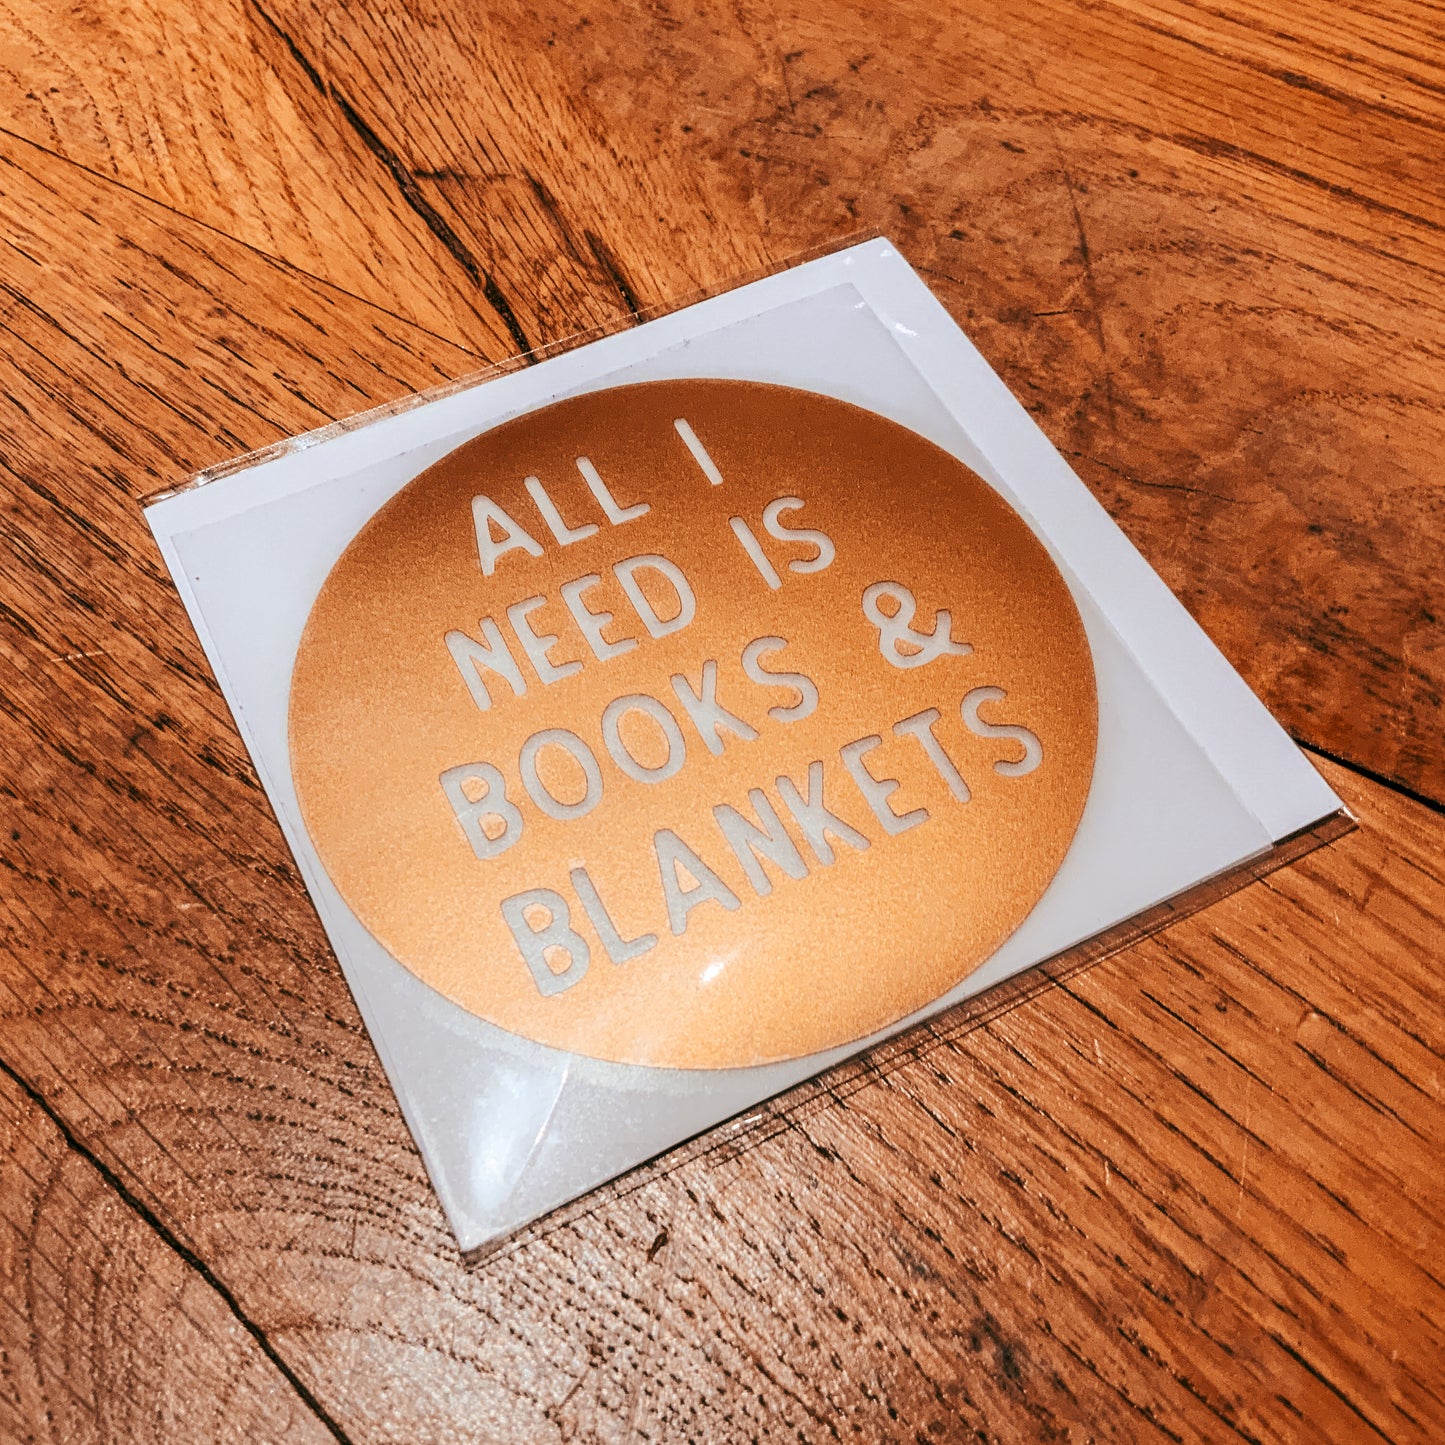 Books & Blankets Large Gold Vinyl Decal